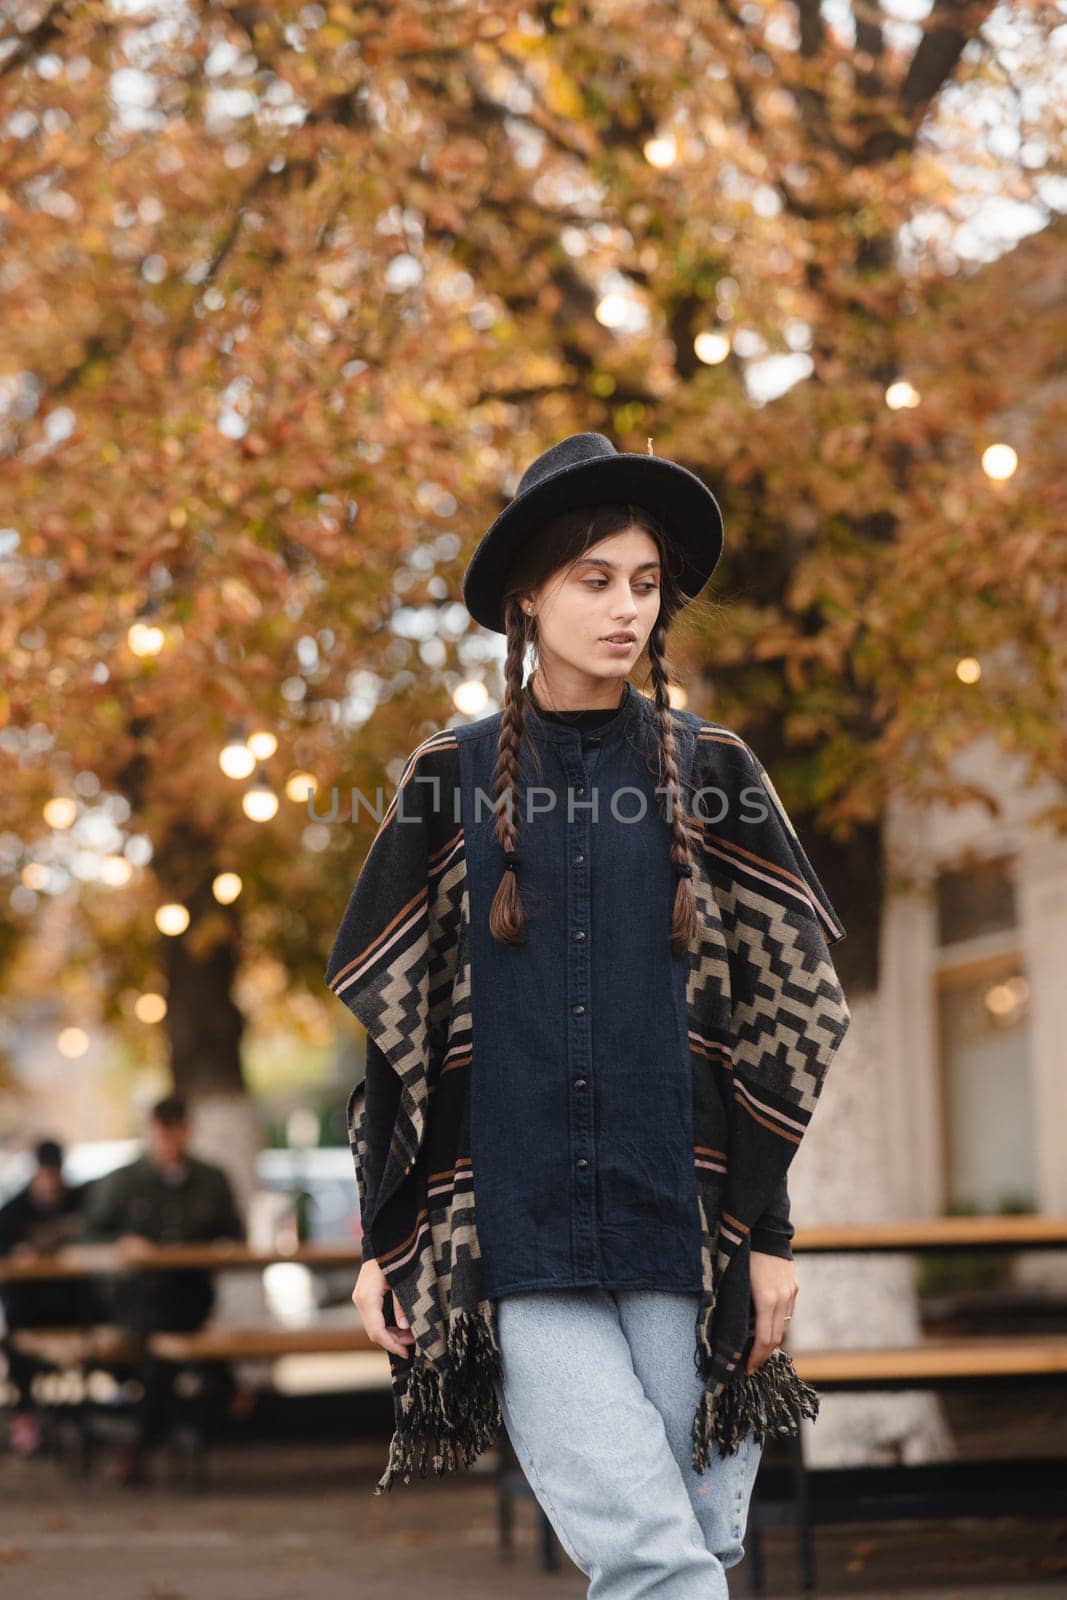 A captivating girl, with bohemian flair, accents her look with a black hat in the fall cityscape. by teksomolika